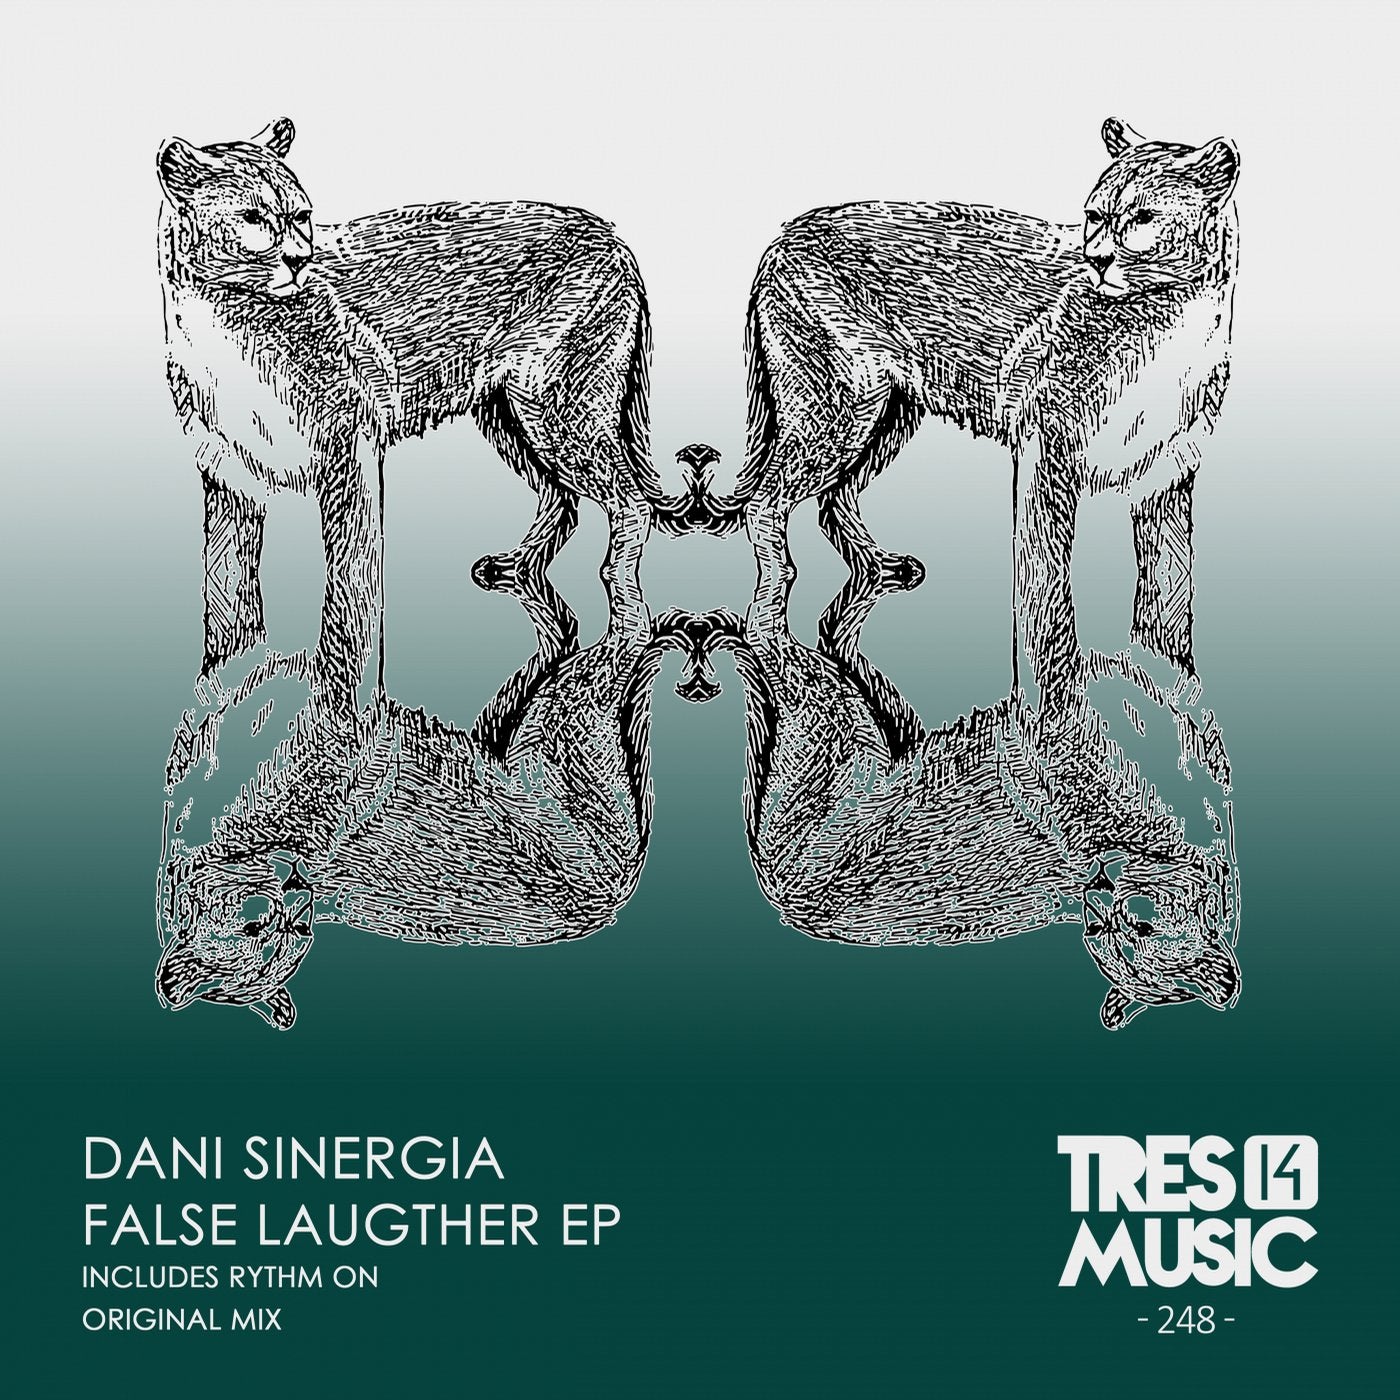 FALSE LAUGHTER EP